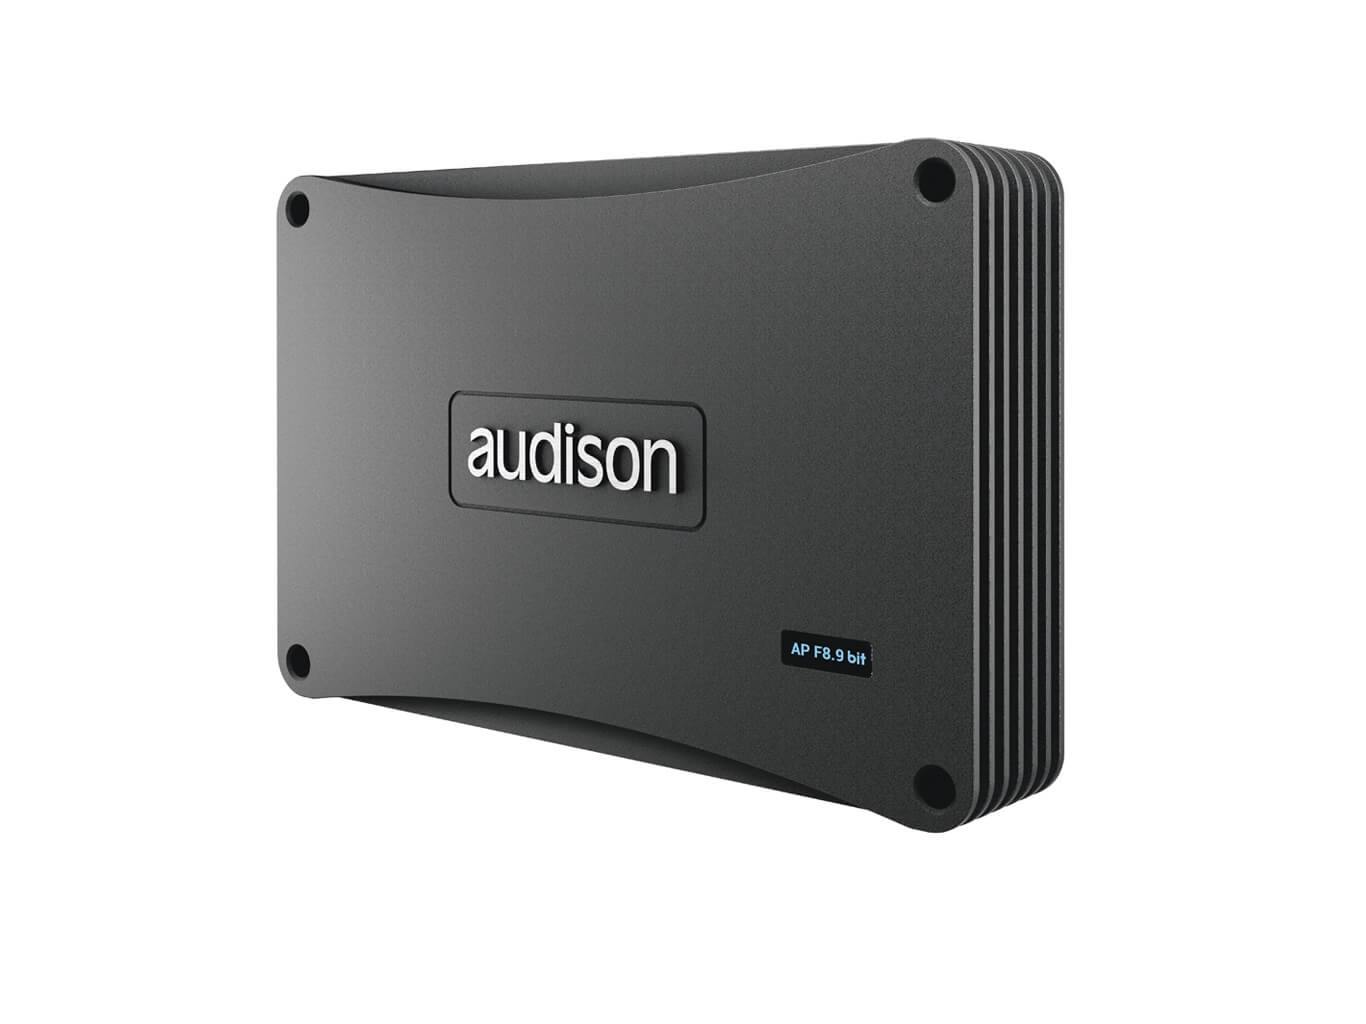 Audison Prima Forza AP F8.9 bit Amplifier with DSP - Side